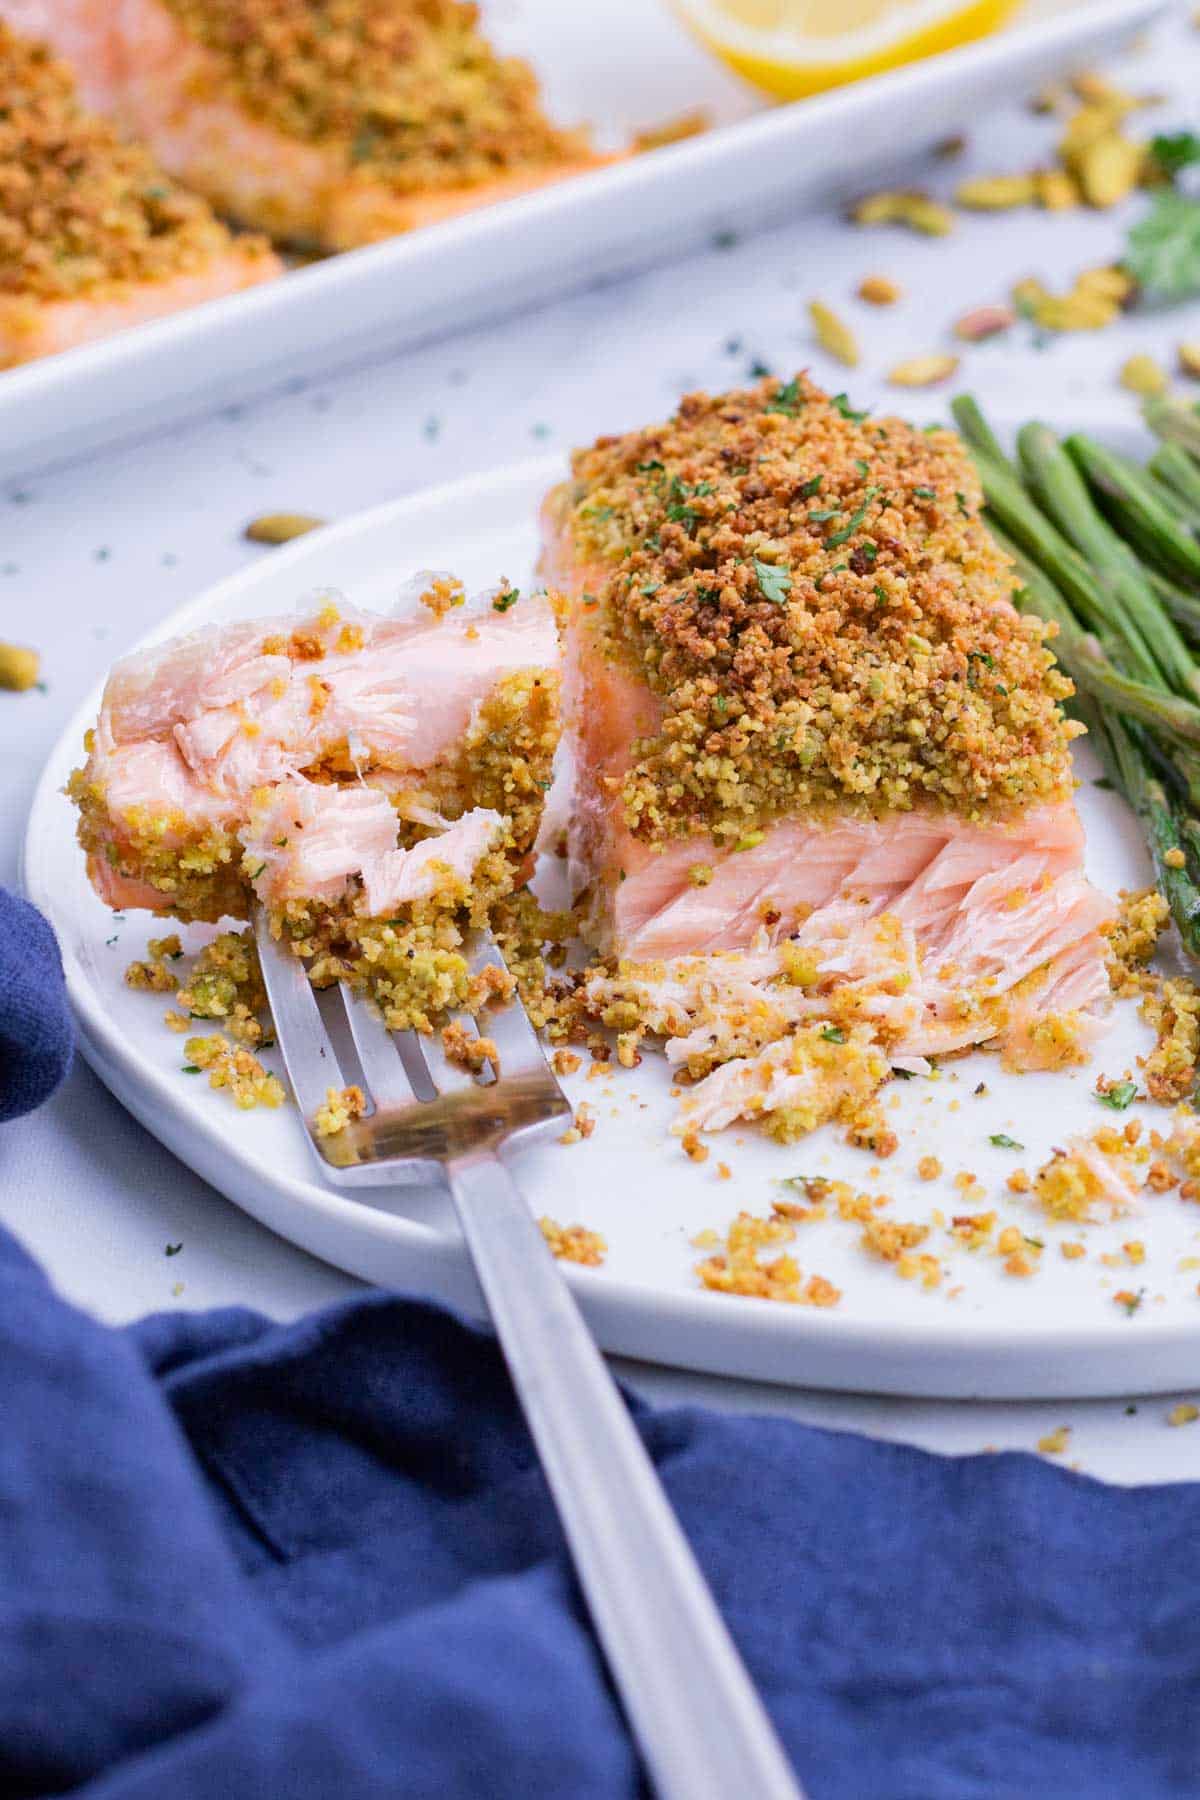 A fork digs into a filet of salmon with a pistachio topping.